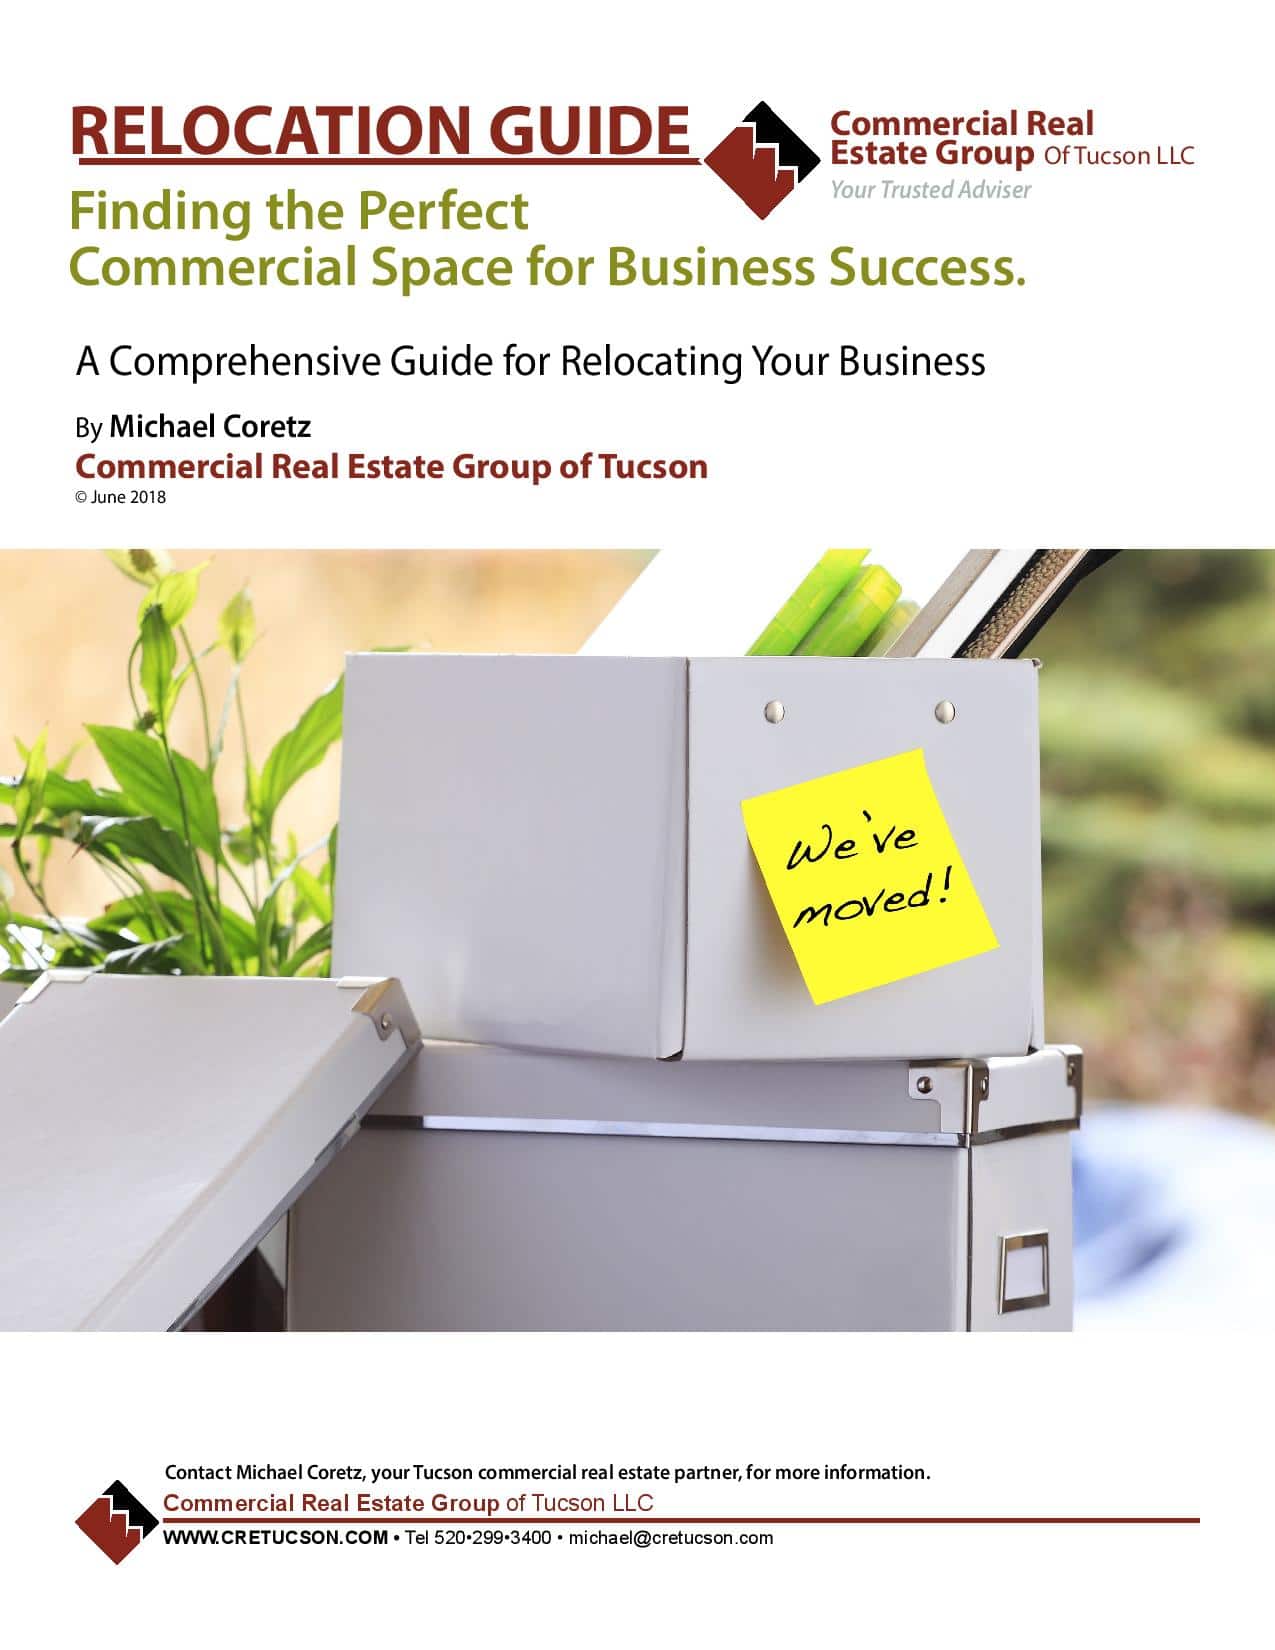 Relocation Guide - Finding the Perfect Commercial Space for Business Success